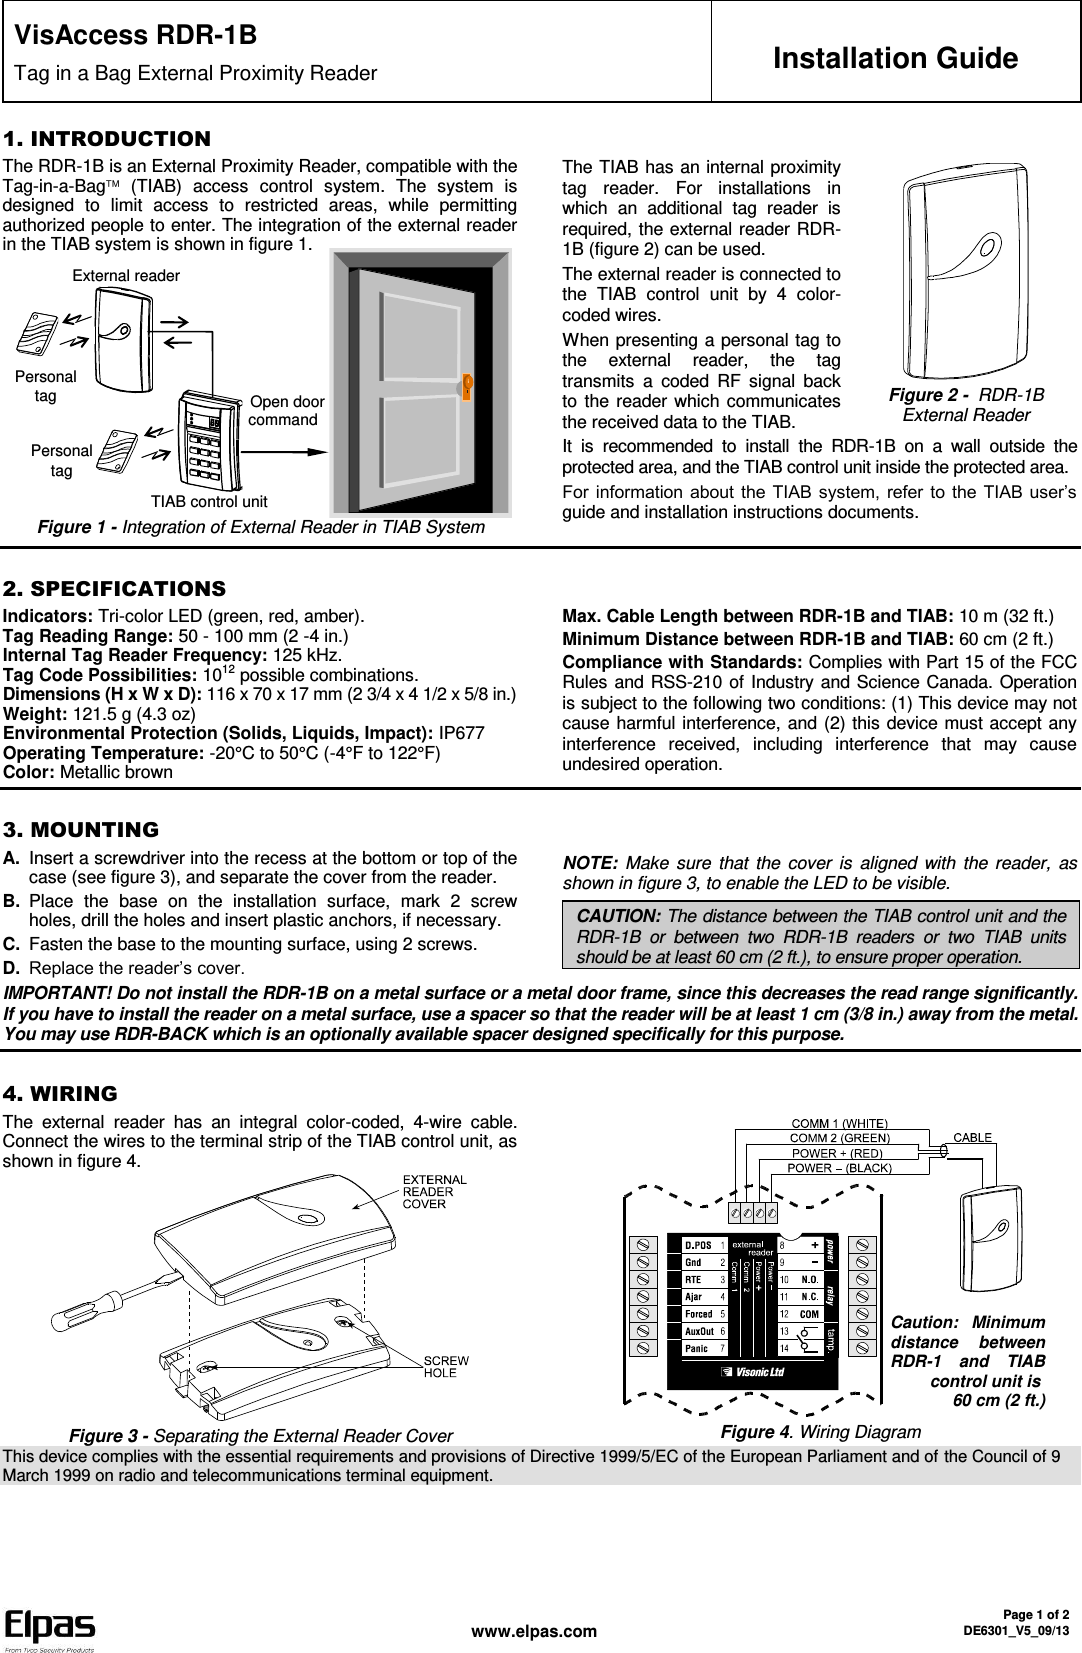  www.elpas.com Page 1 of 2 DE6301_V5_09/13   VisAccess RDR-1B Tag in a Bag External Proximity Reader  Installation Guide 1. INTRODUCTION The RDR-1B is an External Proximity Reader, compatible with the Tag-in-a-Bag  (TIAB)  access  control  system.  The  system  is designed  to  limit  access  to  restricted  areas,  while  permitting authorized people to enter. The integration of the external reader in the TIAB system is shown in figure 1.              Figure 1 - Integration of External Reader in TIAB System The TIAB has an internal proximity tag  reader.  For  installations  in which  an  additional  tag  reader  is required, the external reader RDR-1B (figure 2) can be used. The external reader is connected to the  TIAB  control  unit  by  4  color-coded wires. When presenting a personal tag to the  external  reader,  the  tag transmits  a  coded  RF  signal  back to the reader which communicates the received data to the TIAB.  Figure 2 -  RDR-1B External Reader It  is  recommended  to  install  the  RDR-1B  on  a  wall  outside  the protected area, and the TIAB control unit inside the protected area. For information about the  TIAB system,  refer to  the  TIAB user’s guide and installation instructions documents.  2. SPECIFICATIONS Indicators: Tri-color LED (green, red, amber). Tag Reading Range: 50 - 100 mm (2 -4 in.) Internal Tag Reader Frequency: 125 kHz. Tag Code Possibilities: 1012 possible combinations. Dimensions (H x W x D): 116 x 70 x 17 mm (2 3/4 x 4 1/2 x 5/8 in.)  Weight: 121.5 g (4.3 oz) Environmental Protection (Solids, Liquids, Impact): IP677 Operating Temperature: -20°C to 50°C (-4°F to 122°F)  Color: Metallic brown Max. Cable Length between RDR-1B and TIAB: 10 m (32 ft.) Minimum Distance between RDR-1B and TIAB: 60 cm (2 ft.) Compliance with Standards: Complies with Part 15 of the FCC Rules and RSS-210 of Industry and Science Canada. Operation is subject to the following two conditions: (1) This device may not cause harmful interference, and (2) this device must accept any interference  received,  including  interference  that  may  cause undesired operation.   3. MOUNTING A. Insert a screwdriver into the recess at the bottom or top of the case (see figure 3), and separate the cover from the reader. B. Place  the  base  on  the  installation  surface,  mark  2  screw holes, drill the holes and insert plastic anchors, if necessary.  C. Fasten the base to the mounting surface, using 2 screws. D. Replace the reader’s cover.  NOTE: Make  sure that  the cover  is  aligned  with the reader, as shown in figure 3, to enable the LED to be visible. CAUTION: The distance between the TIAB control unit and the RDR-1B  or  between  two  RDR-1B  readers  or  two  TIAB  units should be at least 60 cm (2 ft.), to ensure proper operation.  IMPORTANT! Do not install the RDR-1B on a metal surface or a metal door frame, since this decreases the read range significantly. If you have to install the reader on a metal surface, use a spacer so that the reader will be at least 1 cm (3/8 in.) away from the metal. You may use RDR-BACK which is an optionally available spacer designed specifically for this purpose.  4. WIRING The  external  reader  has  an  integral  color-coded,  4-wire  cable. Connect the wires to the terminal strip of the TIAB control unit, as shown in figure 4.   Figure 3 - Separating the External Reader Cover    Figure 4. Wiring DiagramThis device complies with the essential requirements and provisions of Directive 1999/5/EC of the European Parliament and of the Council of 9 March 1999 on radio and telecommunications terminal equipment. Open door command External reader     TIAB control unit Personal tag Personal tag     Caution:  Minimum distance  between RDR-1  and  TIAB control unit is  60 cm (2 ft.) 